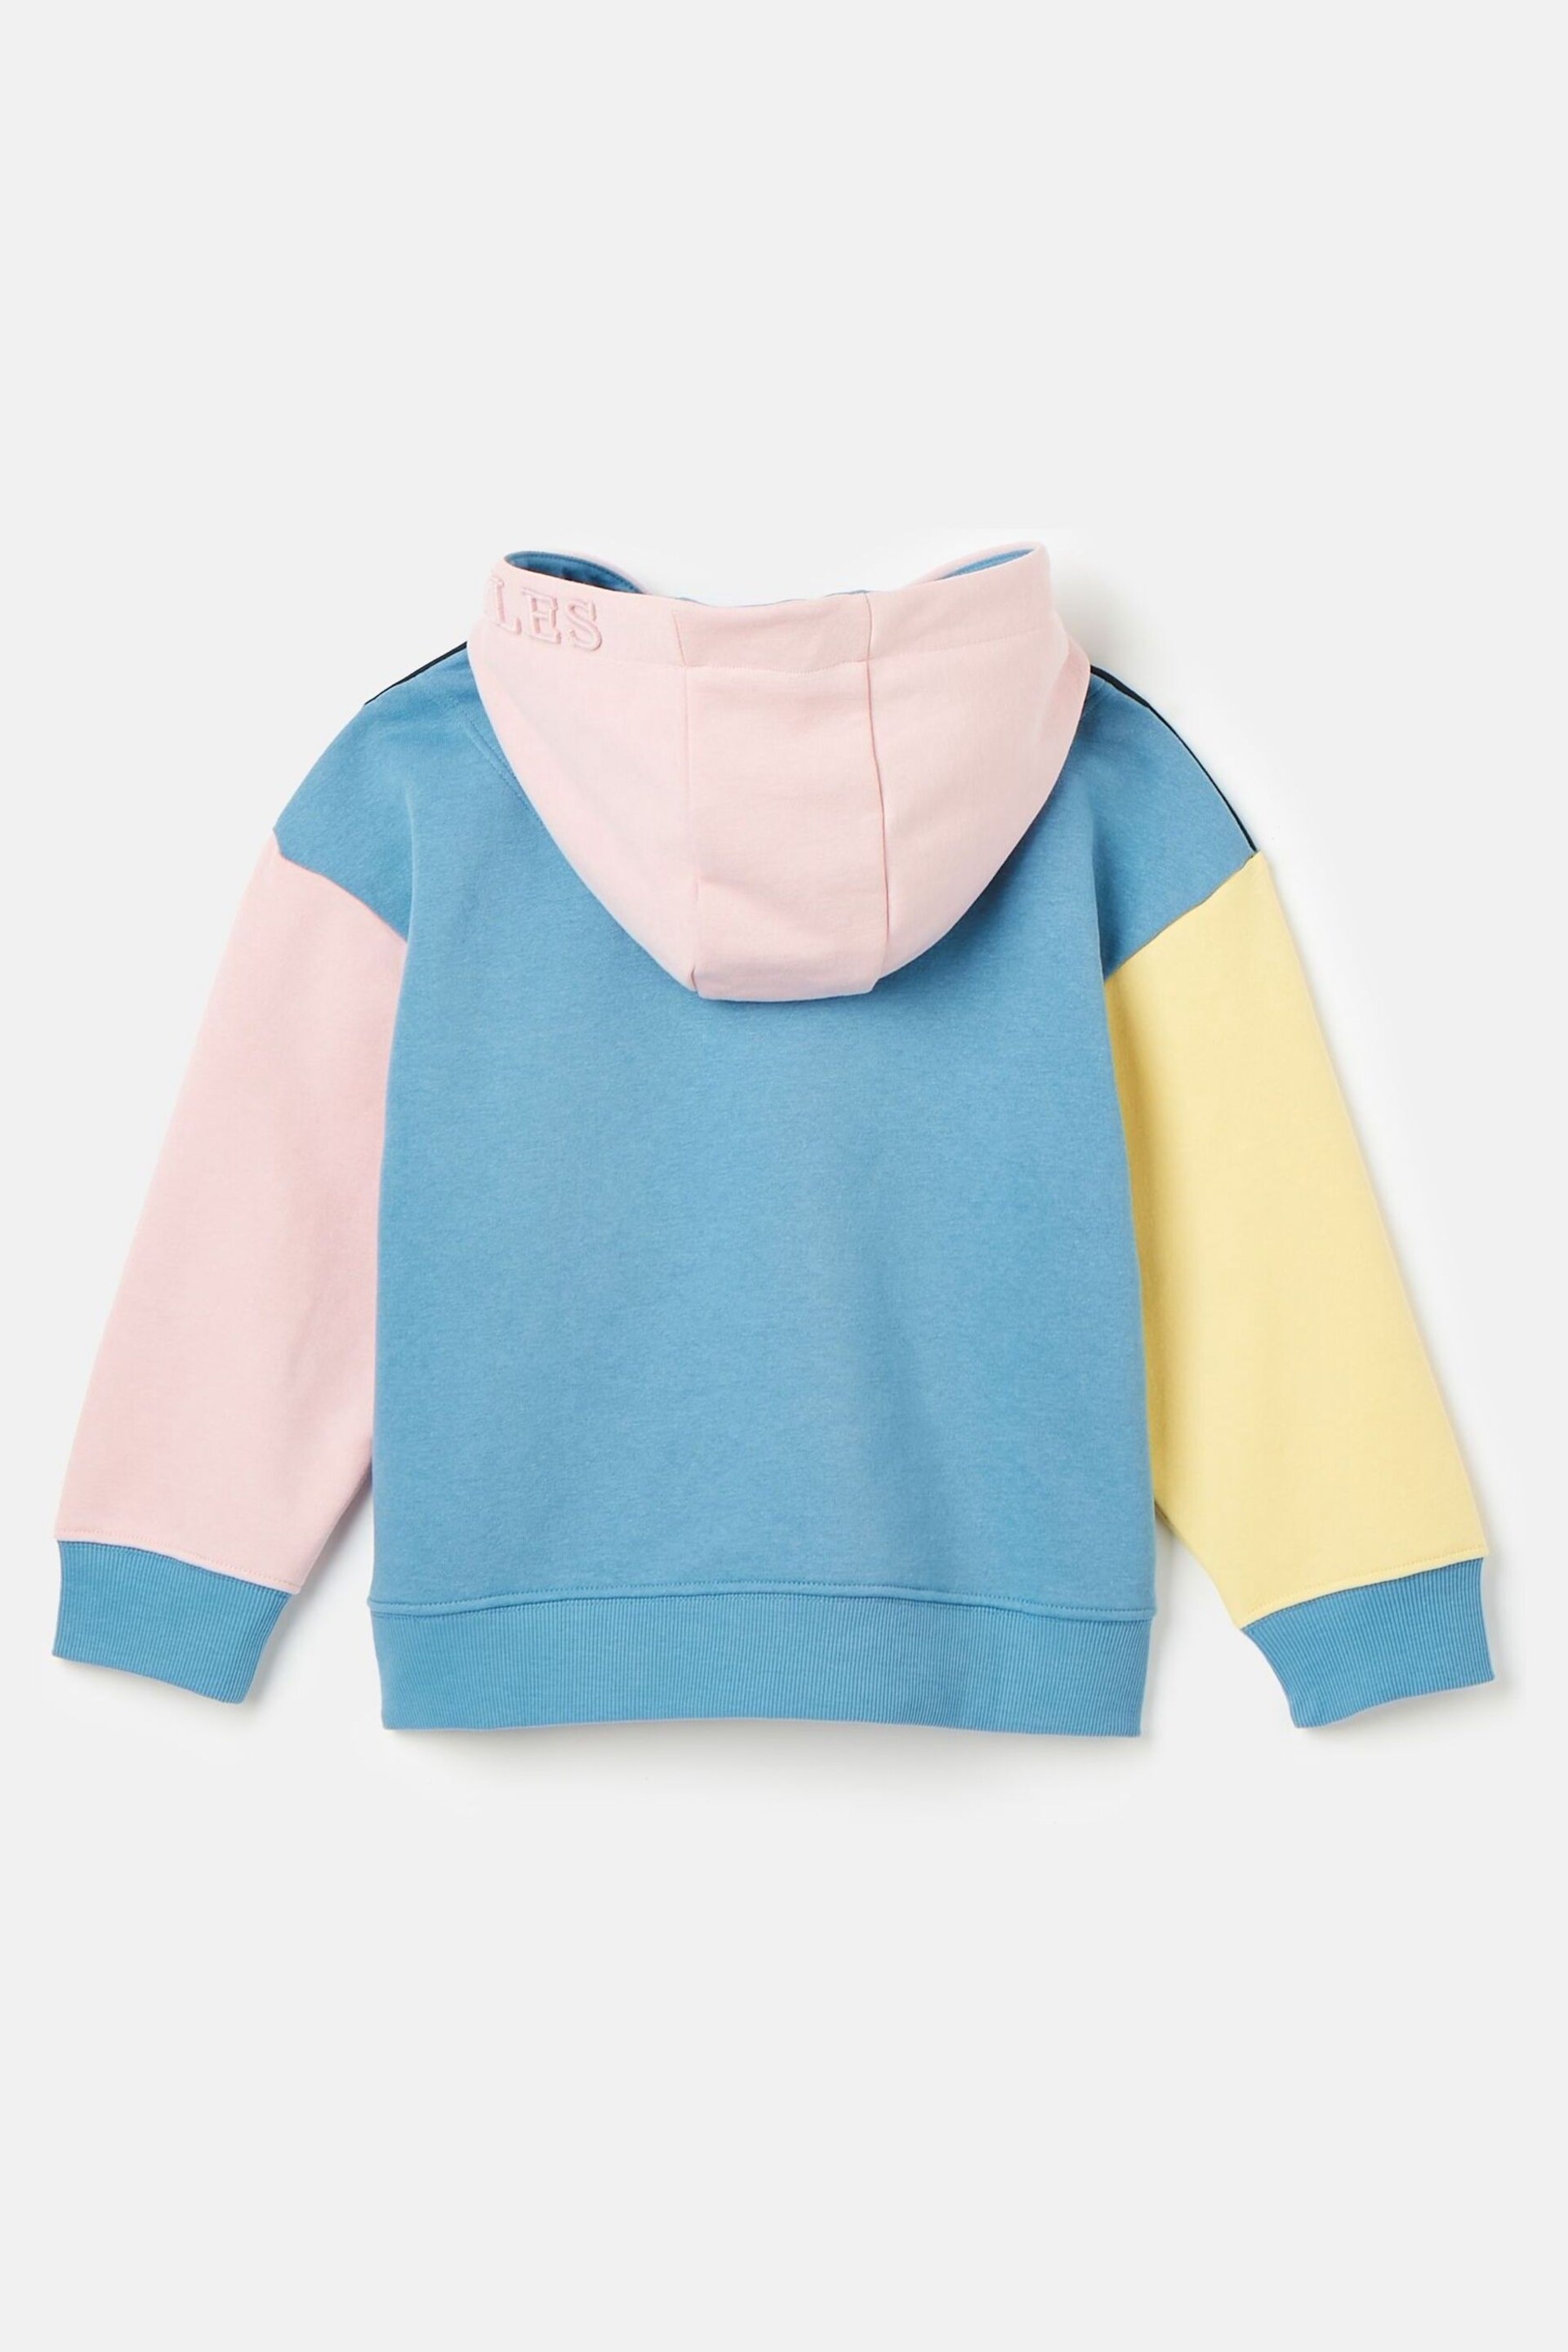 Joules Parkside Colour Block Hoodie With Pocket - Image 2 of 5